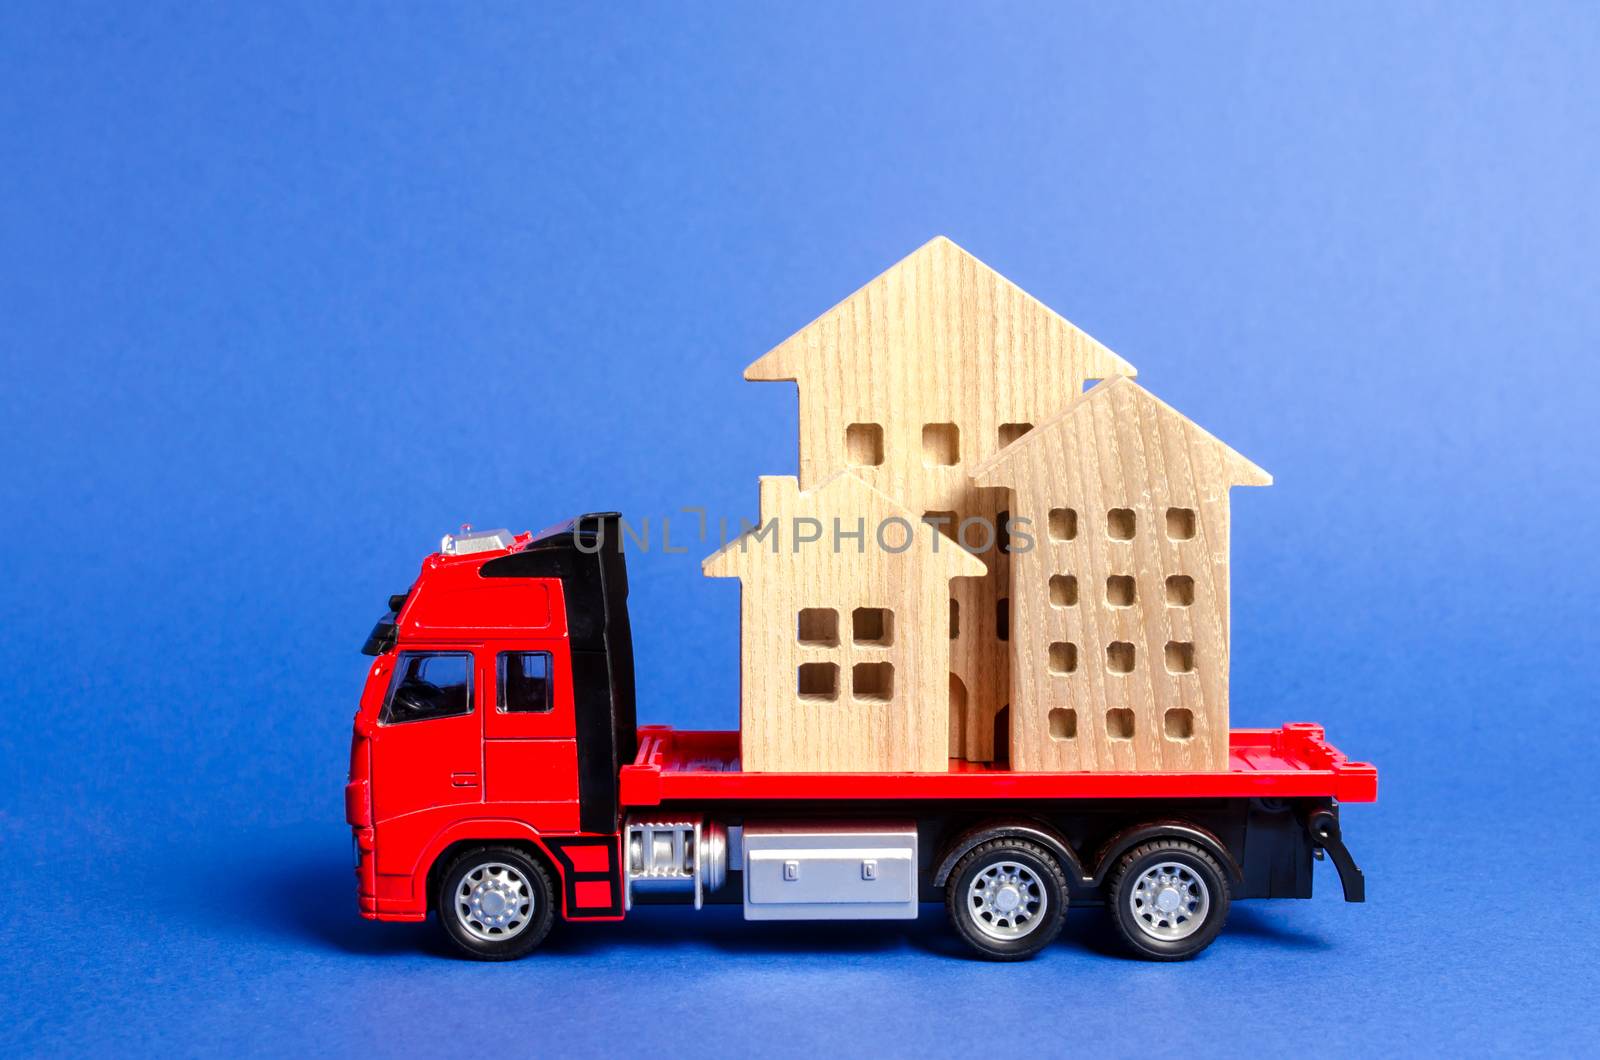 Red truck transports wooden houses. Concept of transportation and cargo shipping, moving company. Construction of new houses and objects. Industry. Logistics and supply. Move entire buildings.